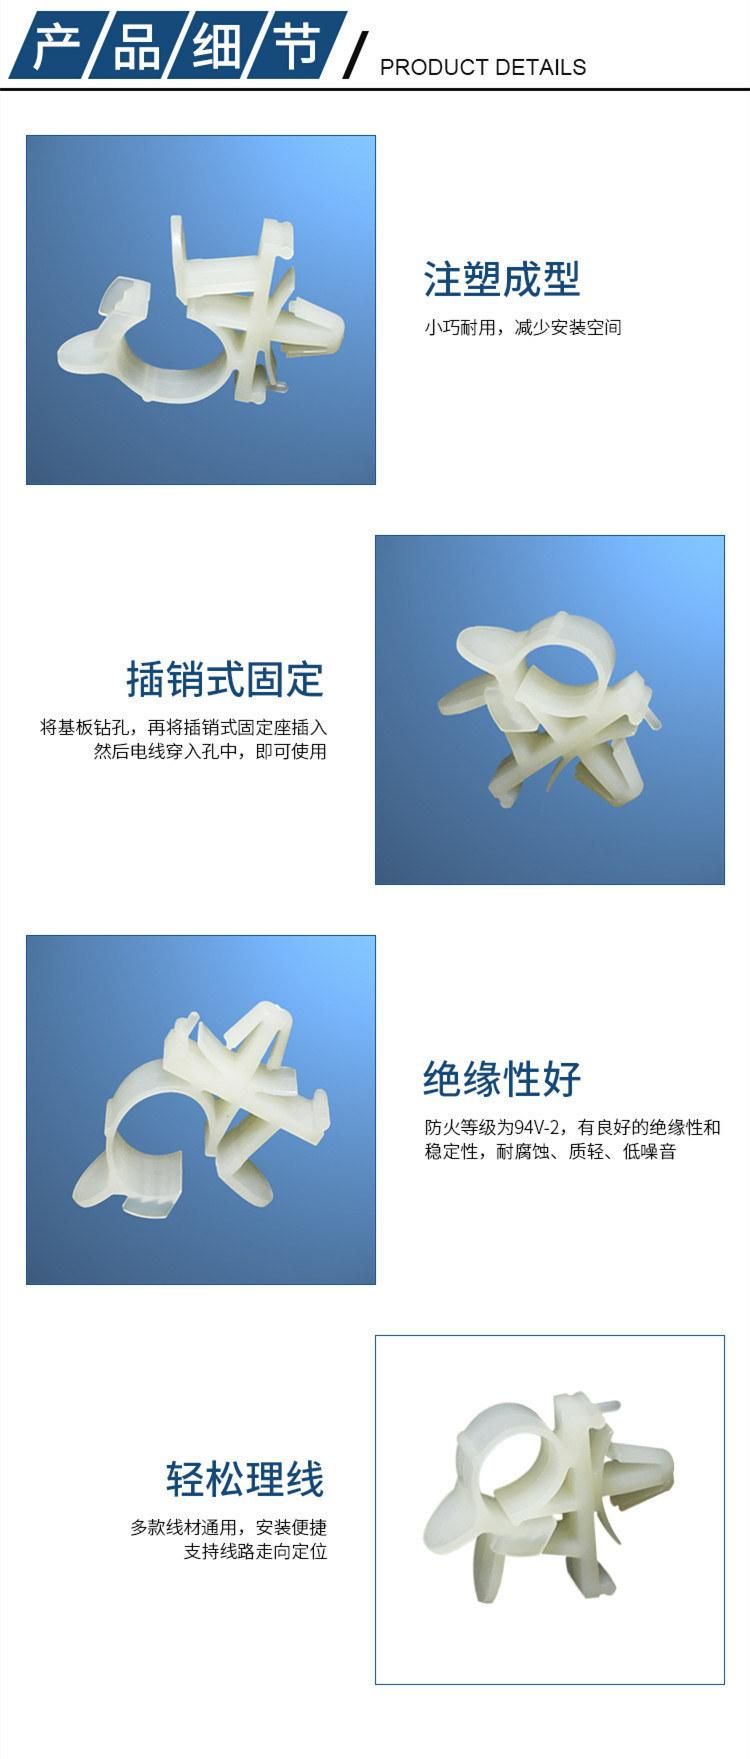 Wire and Cable Buckle Adjustable Cable Fixing, Heyingcn Factory Supply Insulation Nylon Wire Clip